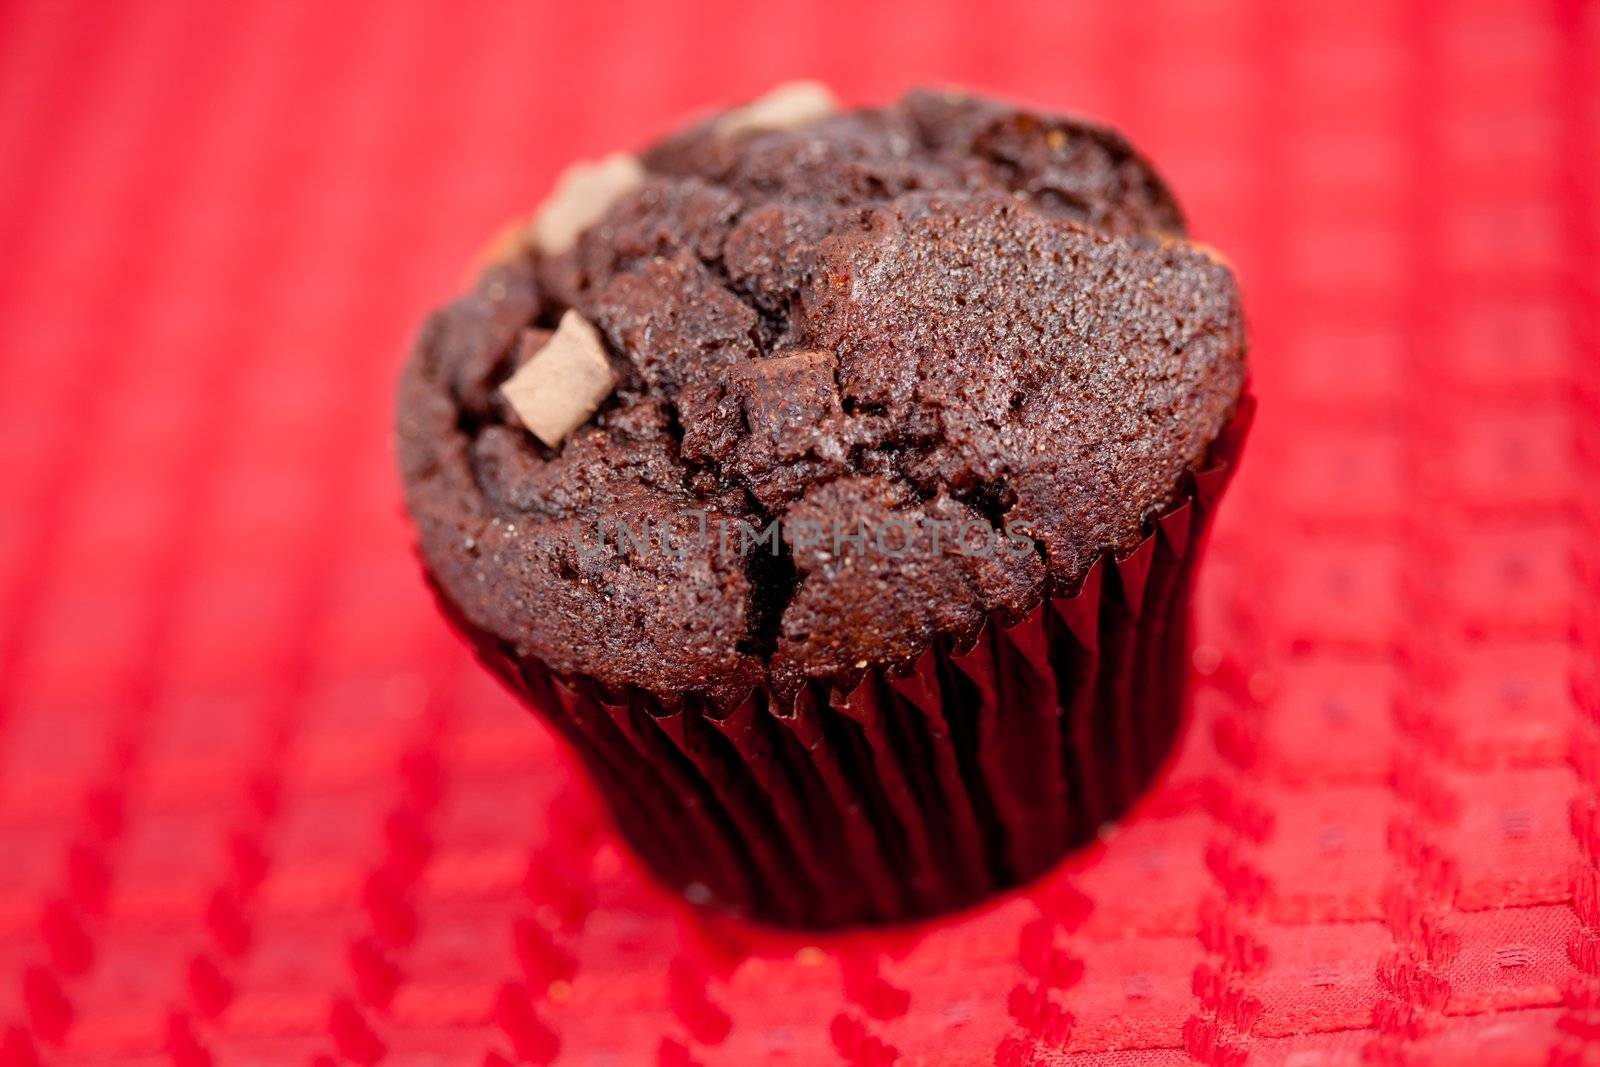 Chocolate muffin on a red tablecloth